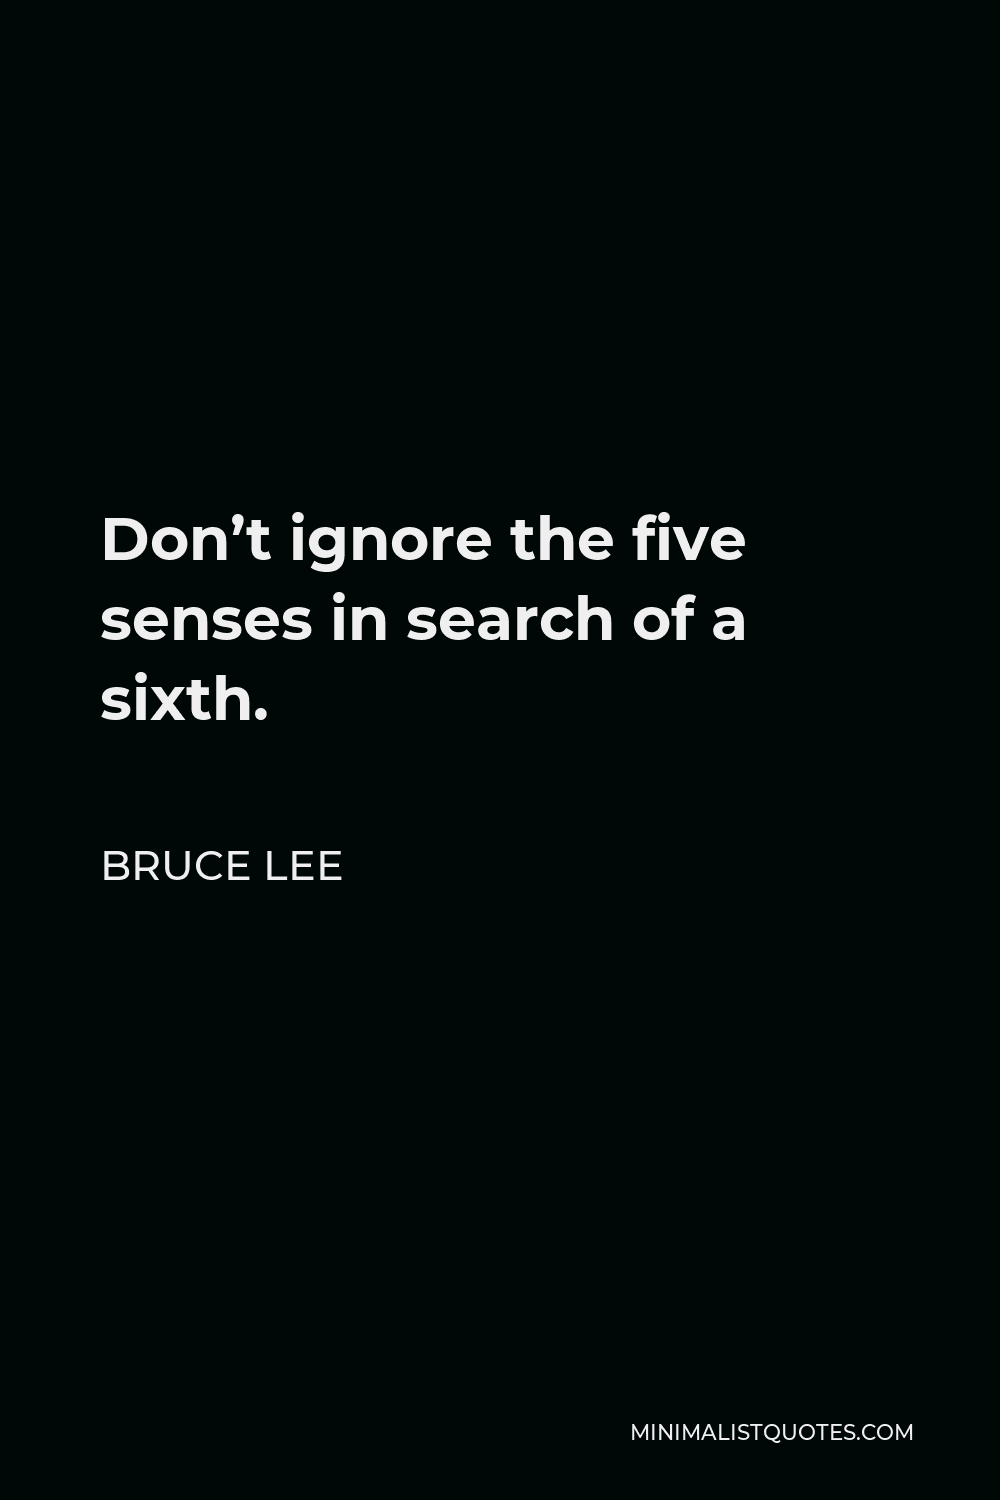 Bruce Lee Quote - Don’t ignore the five senses in search of a sixth.